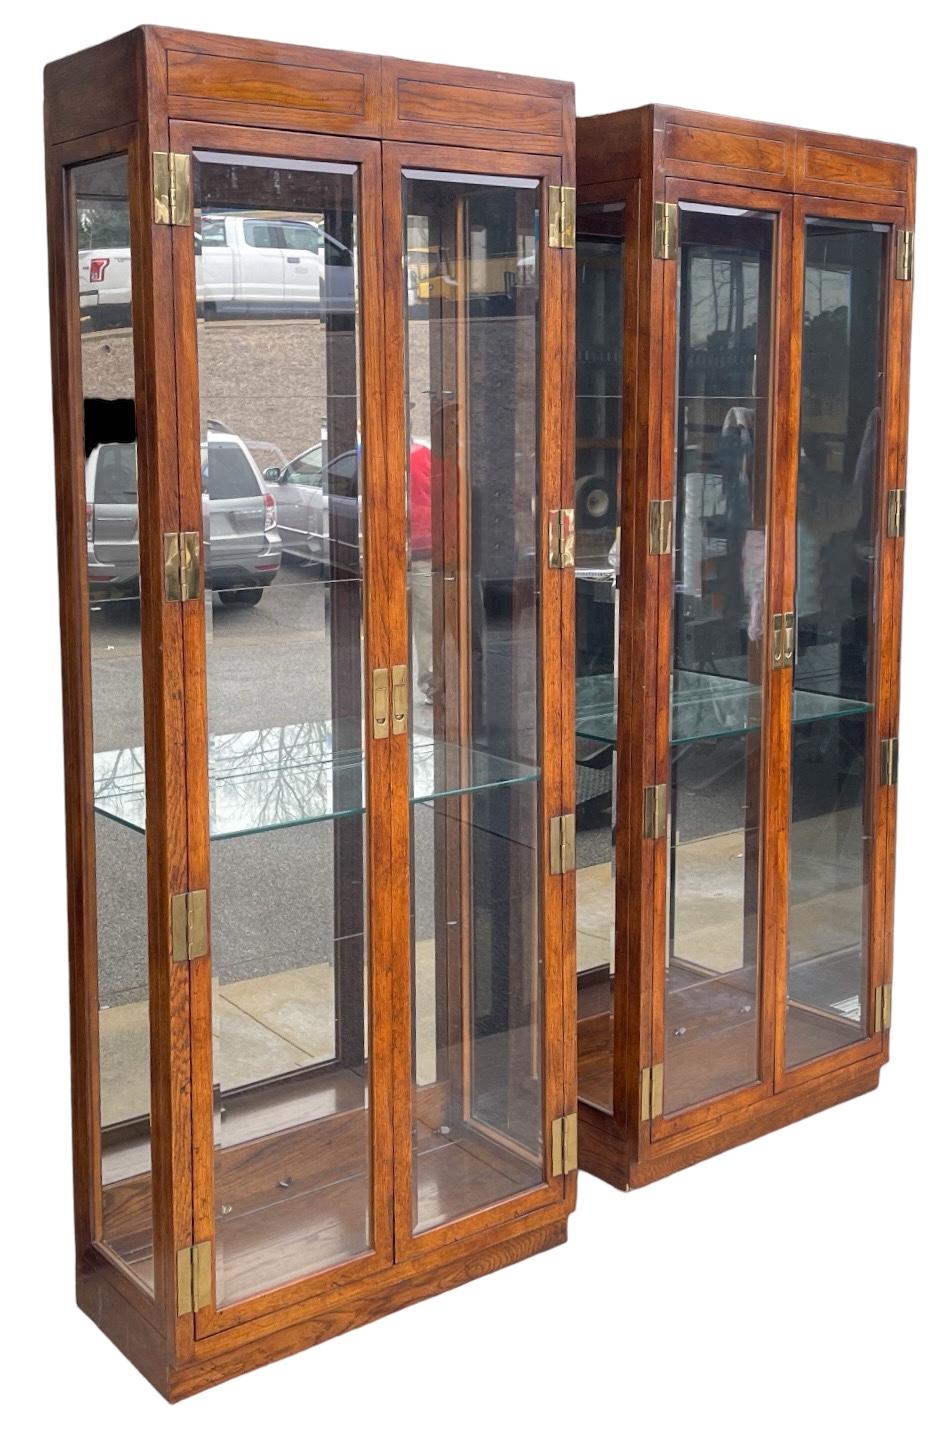 This is a pair of Henredon display cabinets with campaign styling. The backs are mirrored with adjustable glass shelves. They have two lights in each. The cabinets are marked and in very good condition. The wood is oak veneers over hardwood. 

These